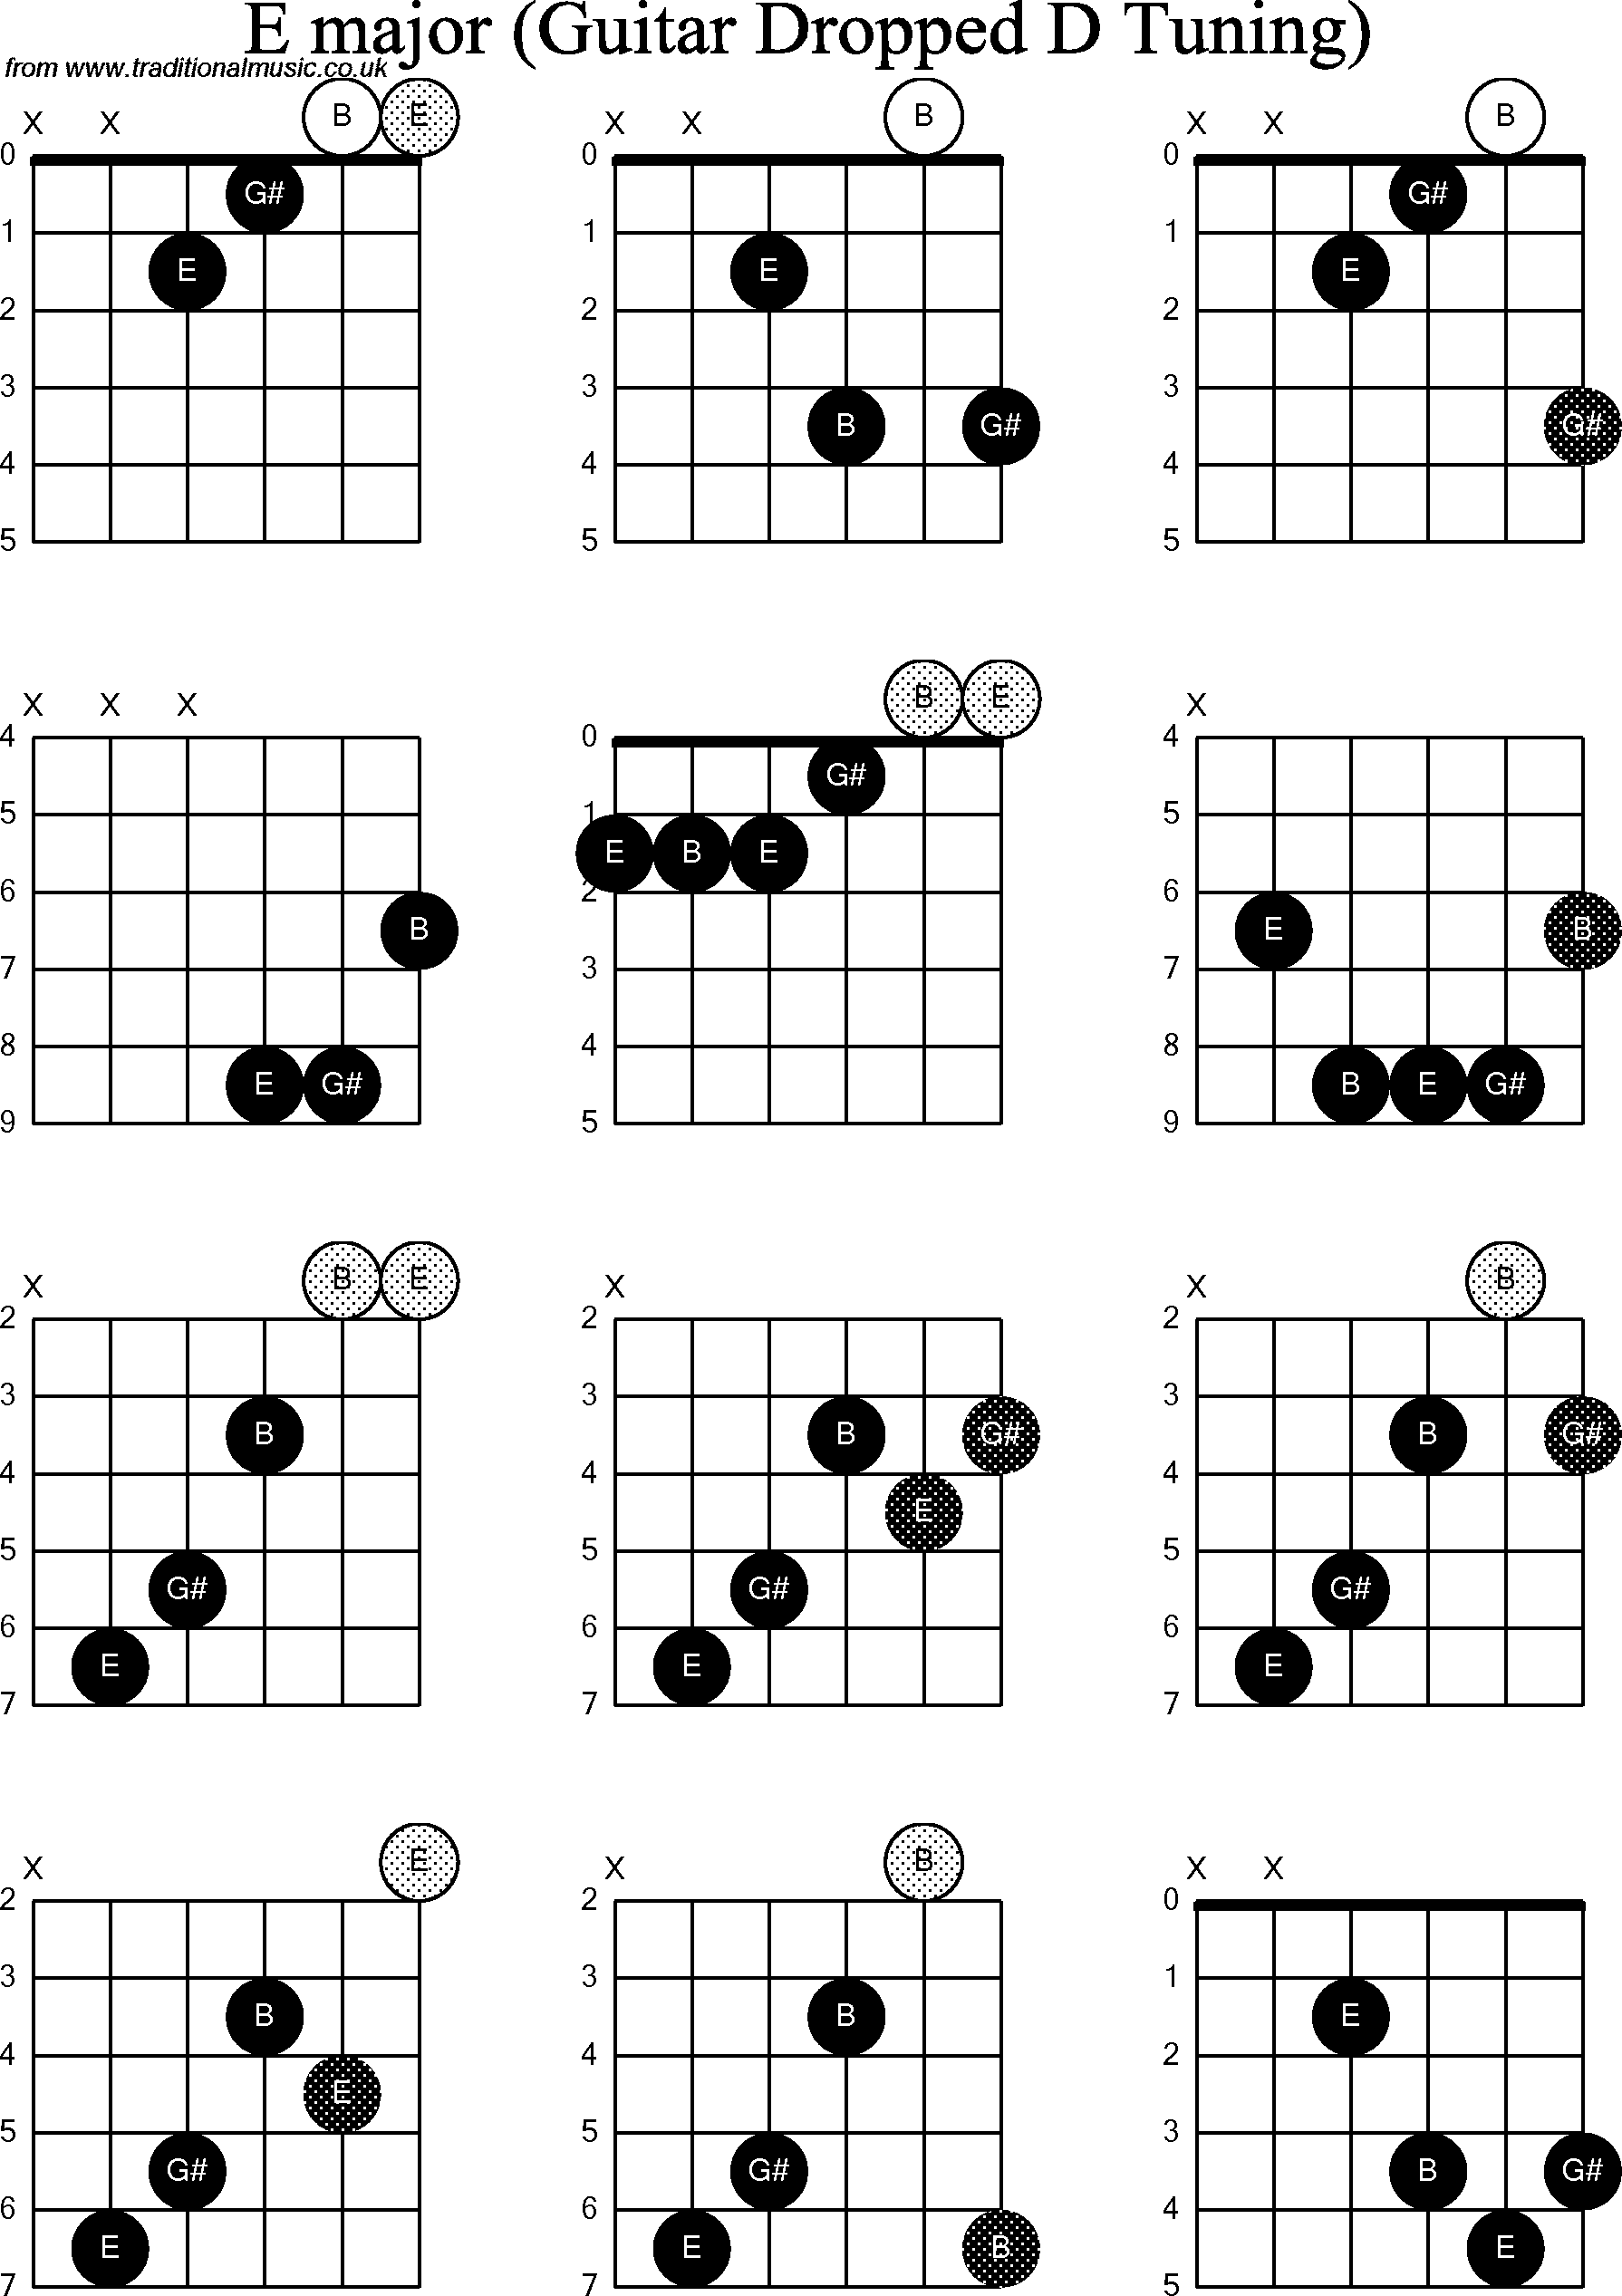 Chord diagrams for dropped D Guitar(DADGBE), E